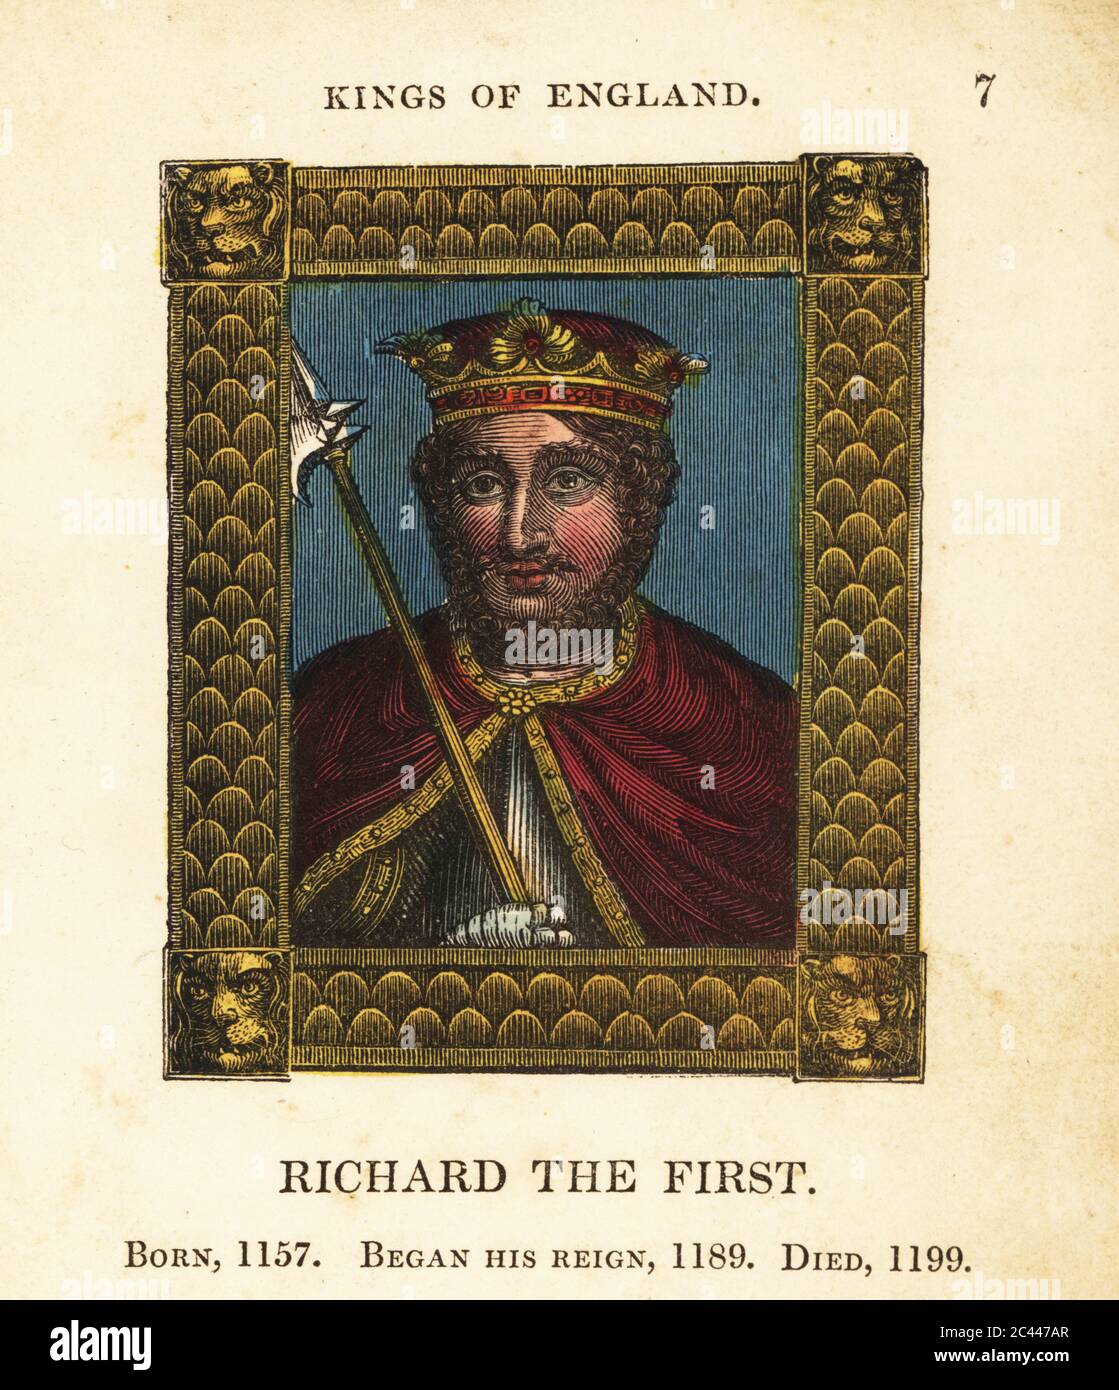 Portrait of King Richard the First, King Richard I the Lionheart of England, born 1157, began reign 1189 and died 1199. In crown, cape with embroidered trim, breastplate and gauntlets, holding an ax within ornate frame. Handcolored engraving by Cosmo Armstrong from Portraits and Characters of the Kings of England, from William the Conqueror to George the Third, John Harris, London, 1830. Stock Photo